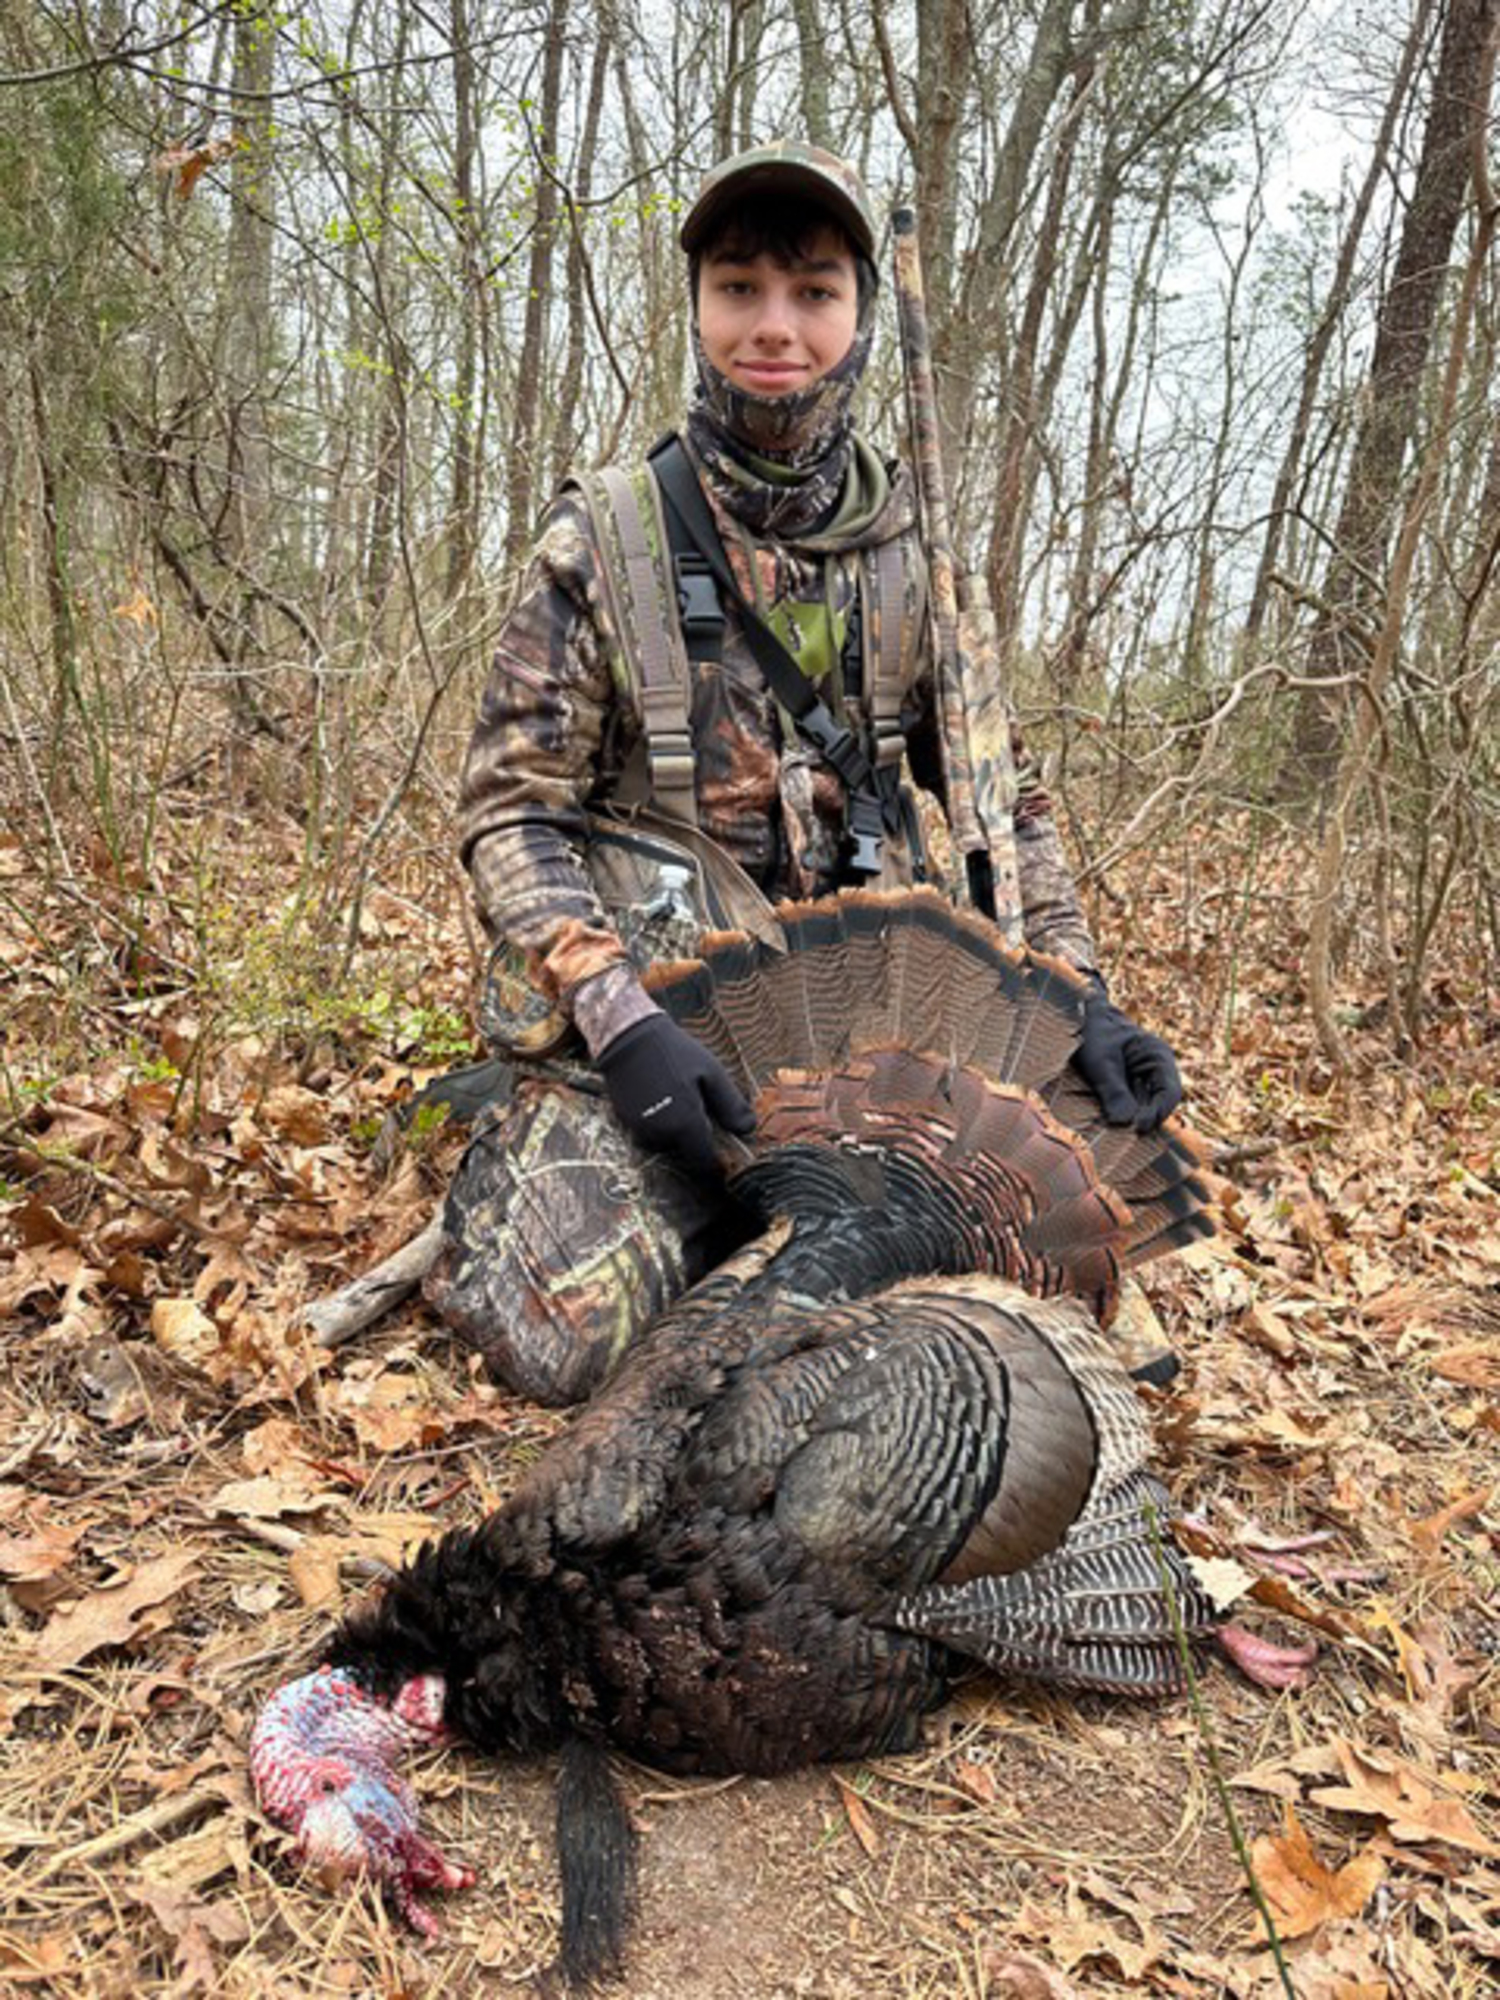 Michael Tessitore Jr. of East Quogue bagged this tom turkey during the youth hunting weekend last month.